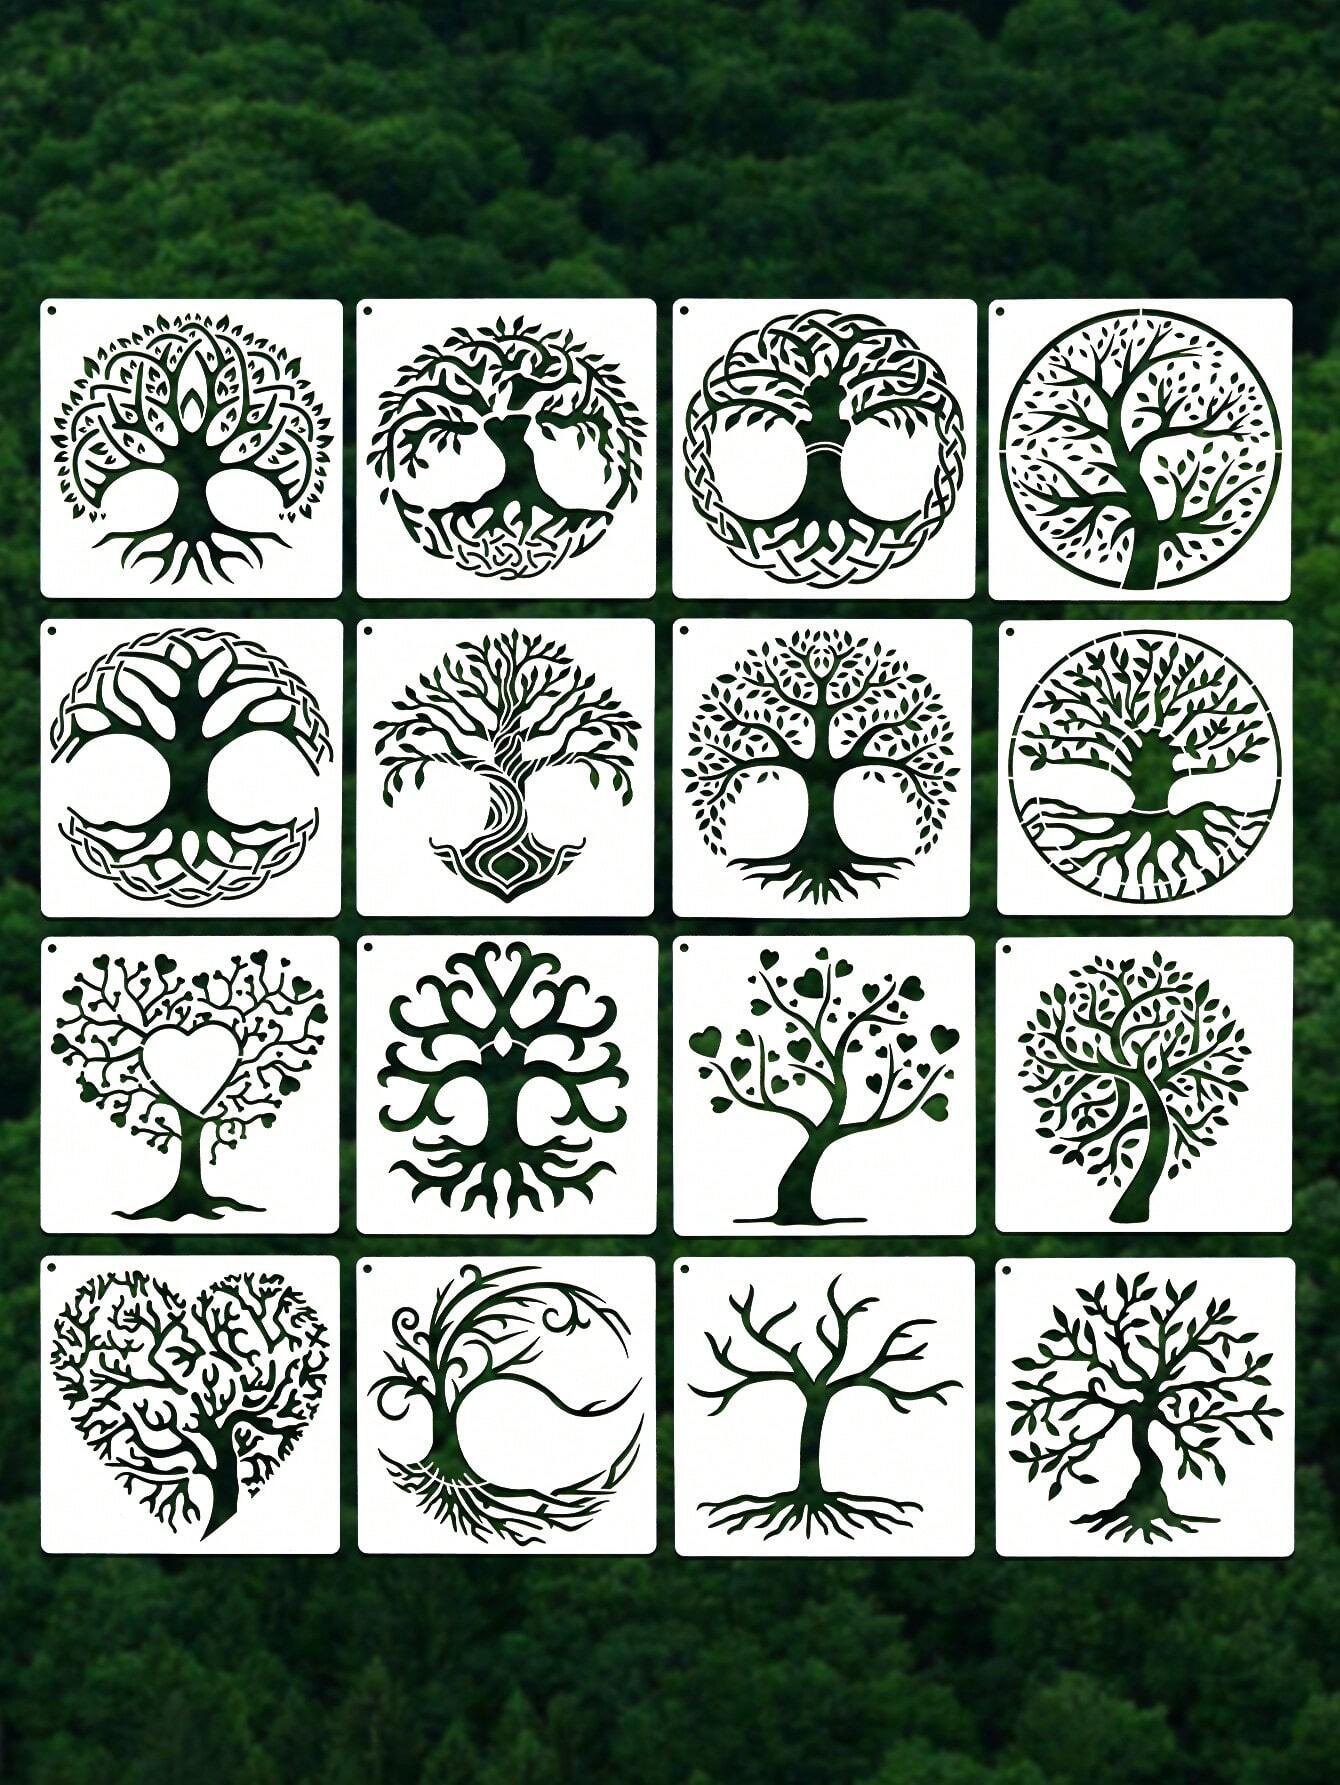 16pcs Tree Pattern Stencils For Drawing/painting